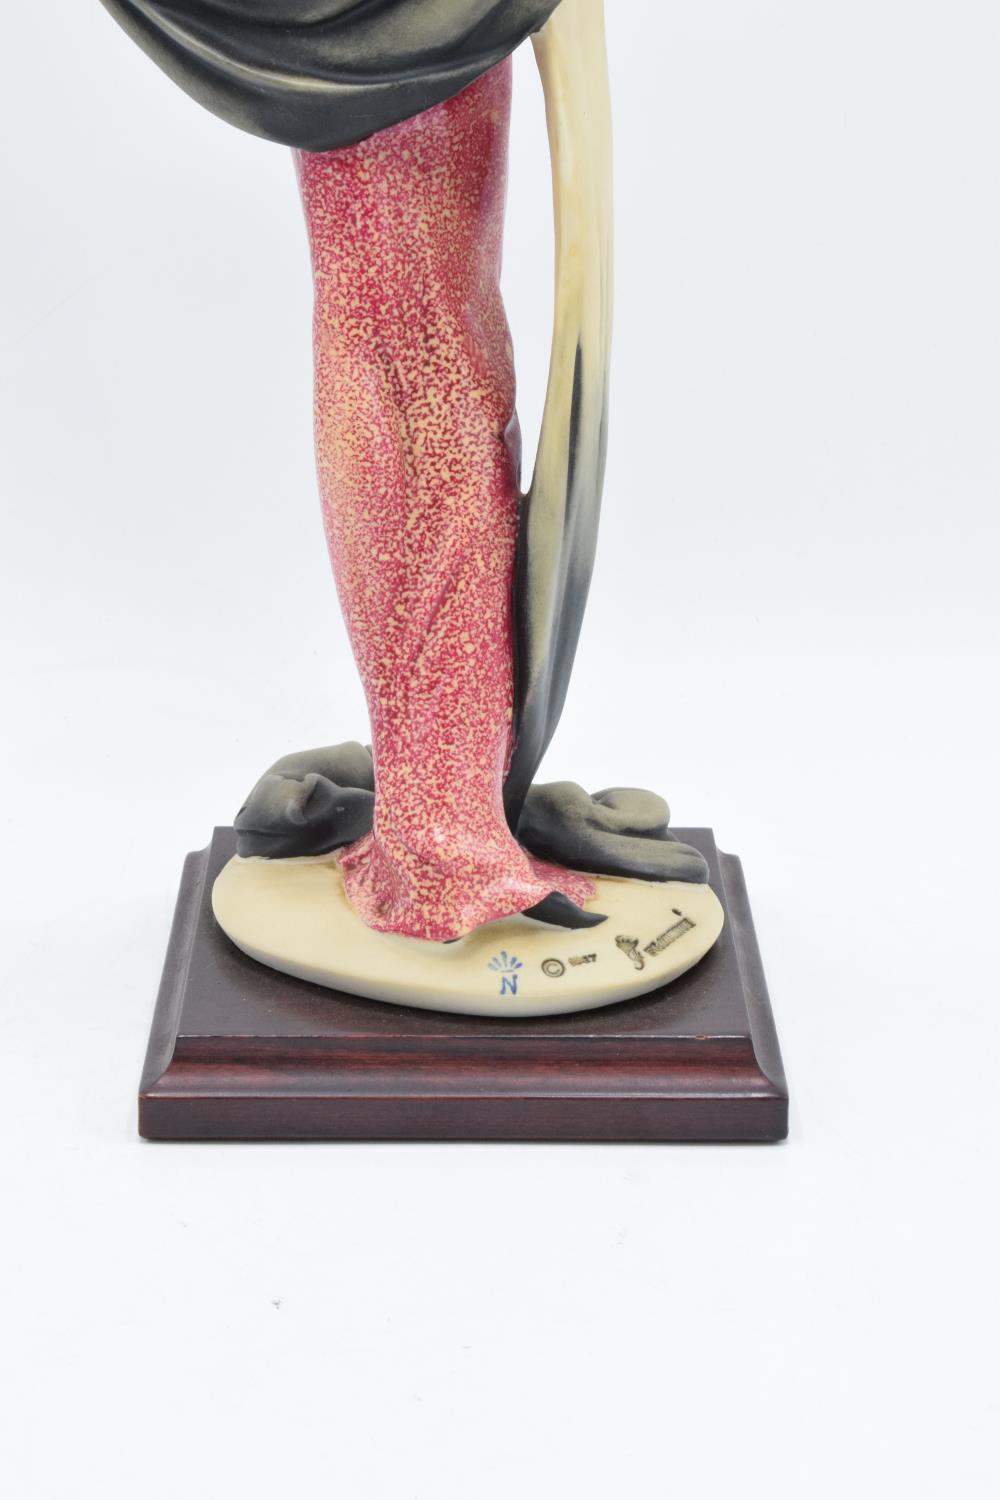 Giuseppe Armani Figurine "Lady with Compact" Mounted on Wooden Base, 1987 Limited Edition My Fair - Image 4 of 6